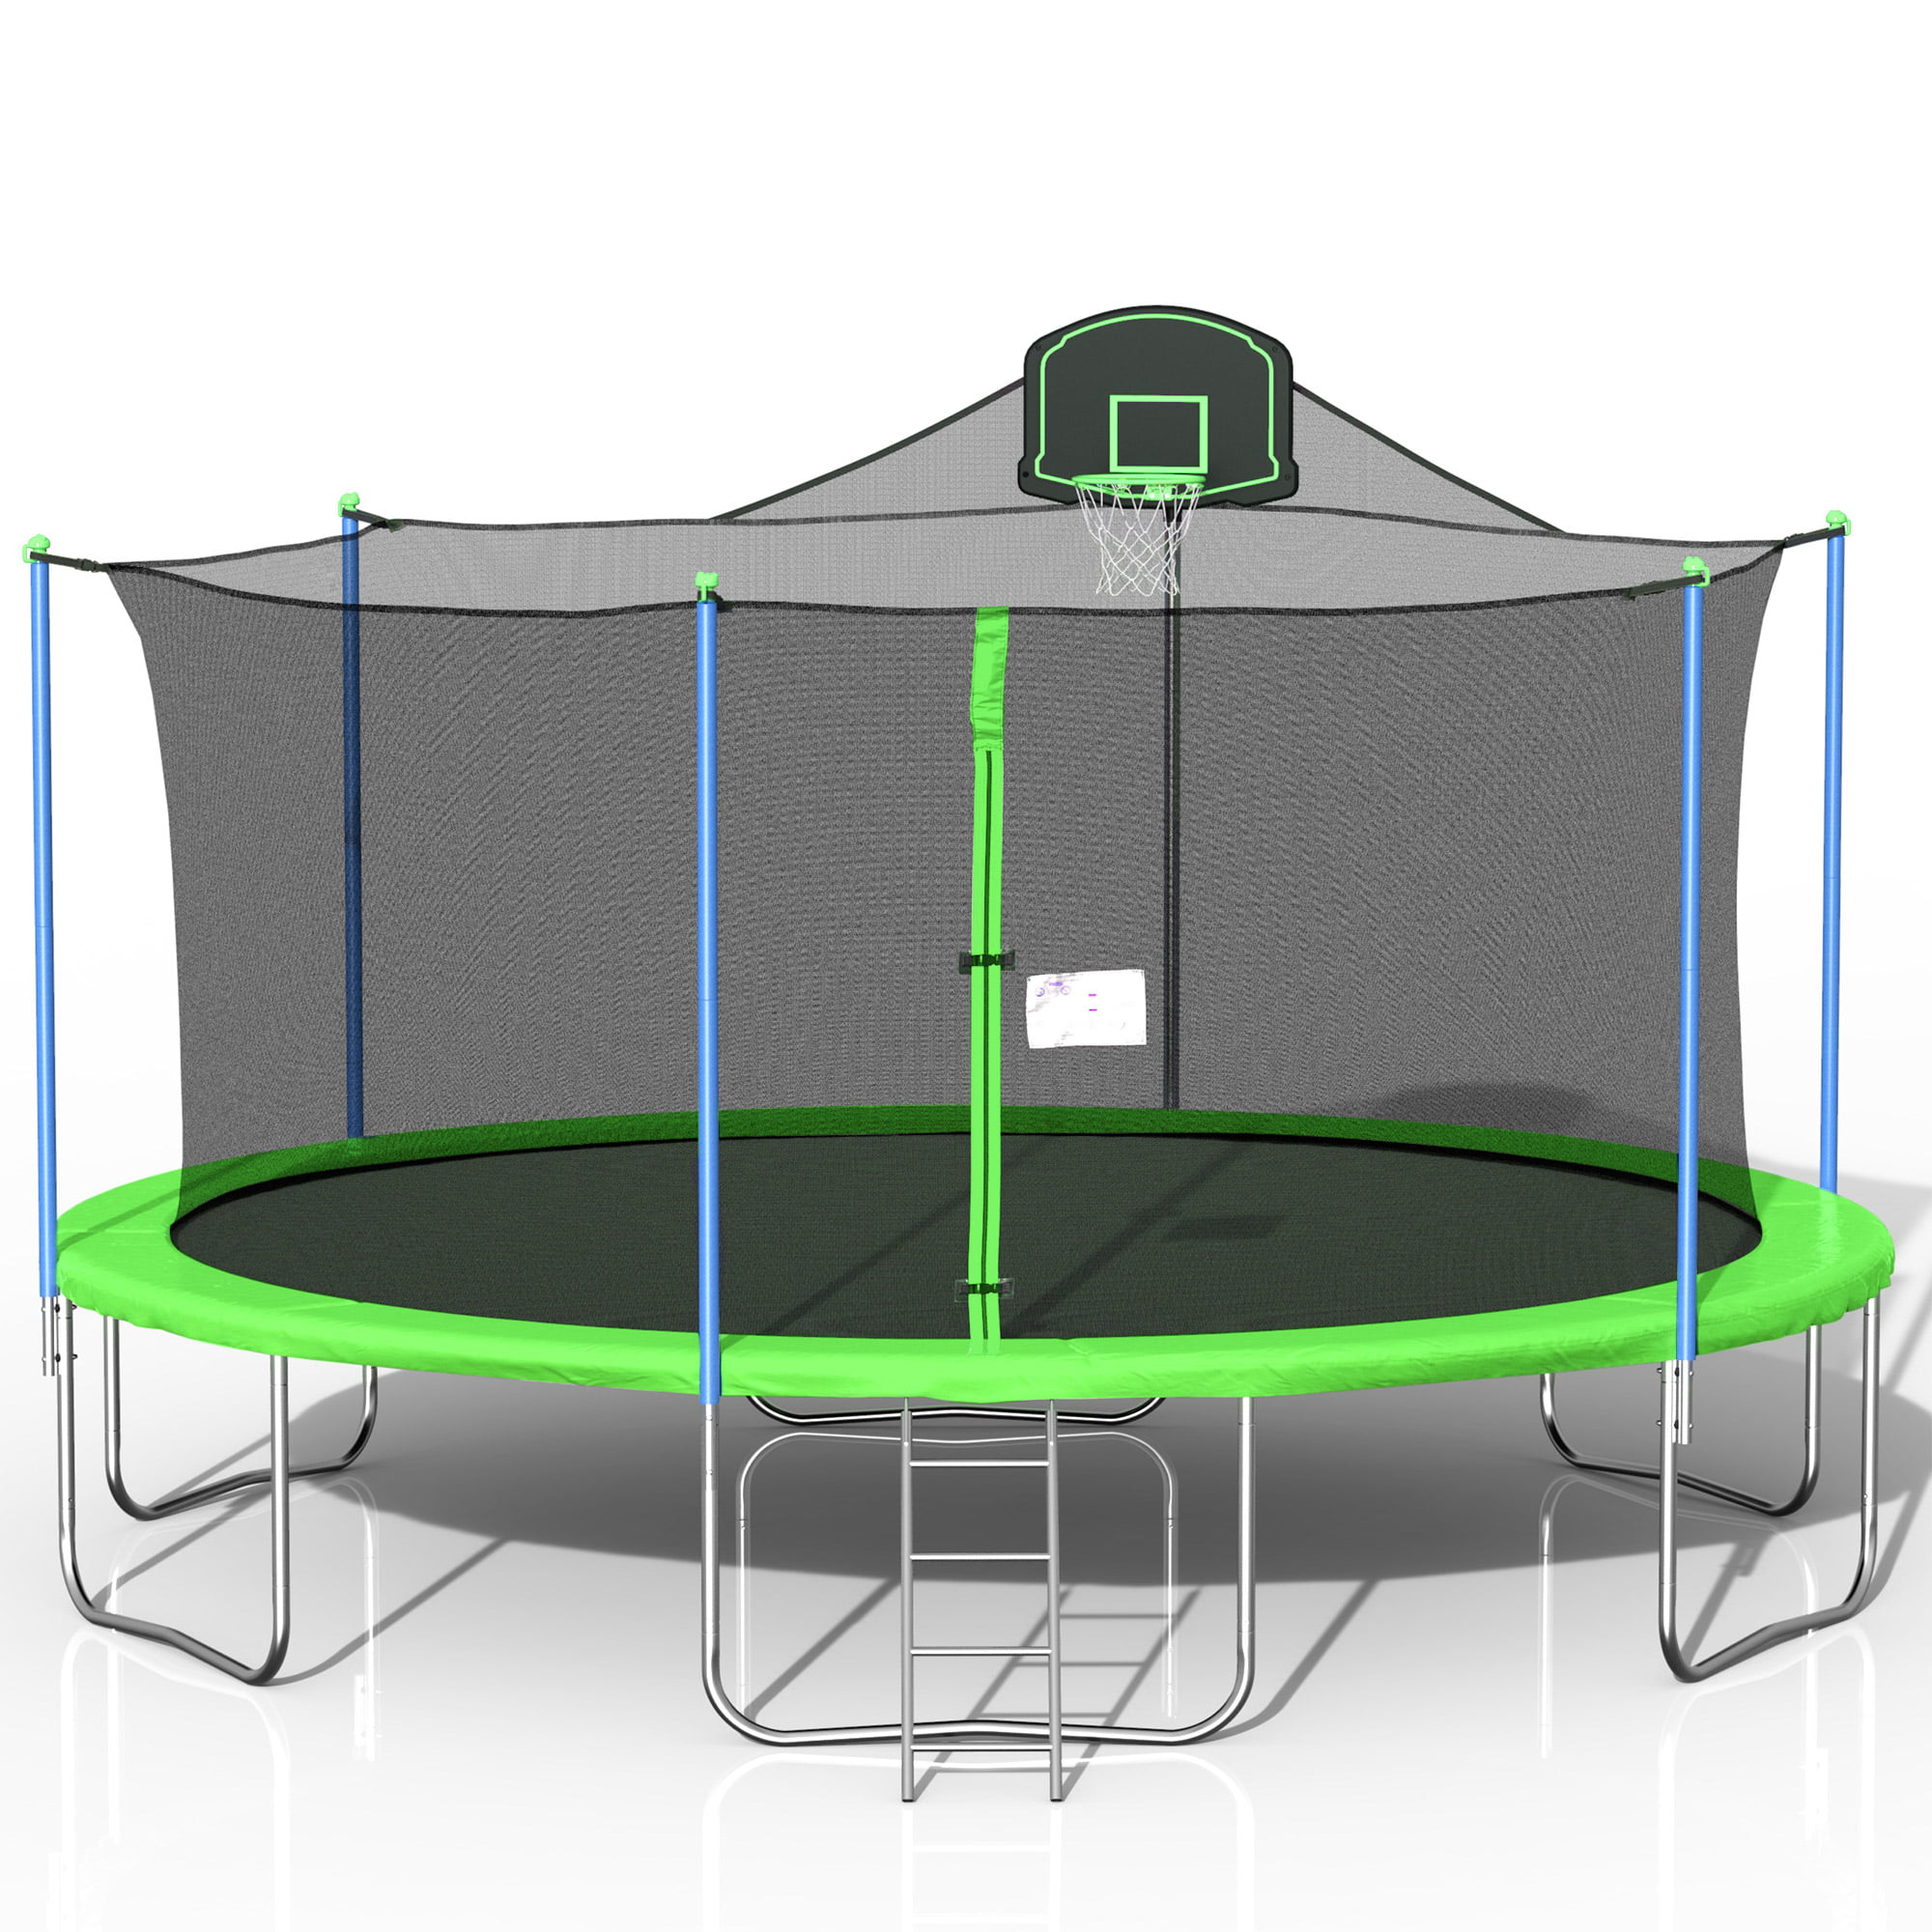 16FT Trampoline, 2021 Upgraded Outdoor Round Trampoline with Safety Enclosure, Basketball Hoop and Ladder, Outdoor Trampoline for Family School Entertainment, Heavy Duty Frame and Coiled Spring, B230